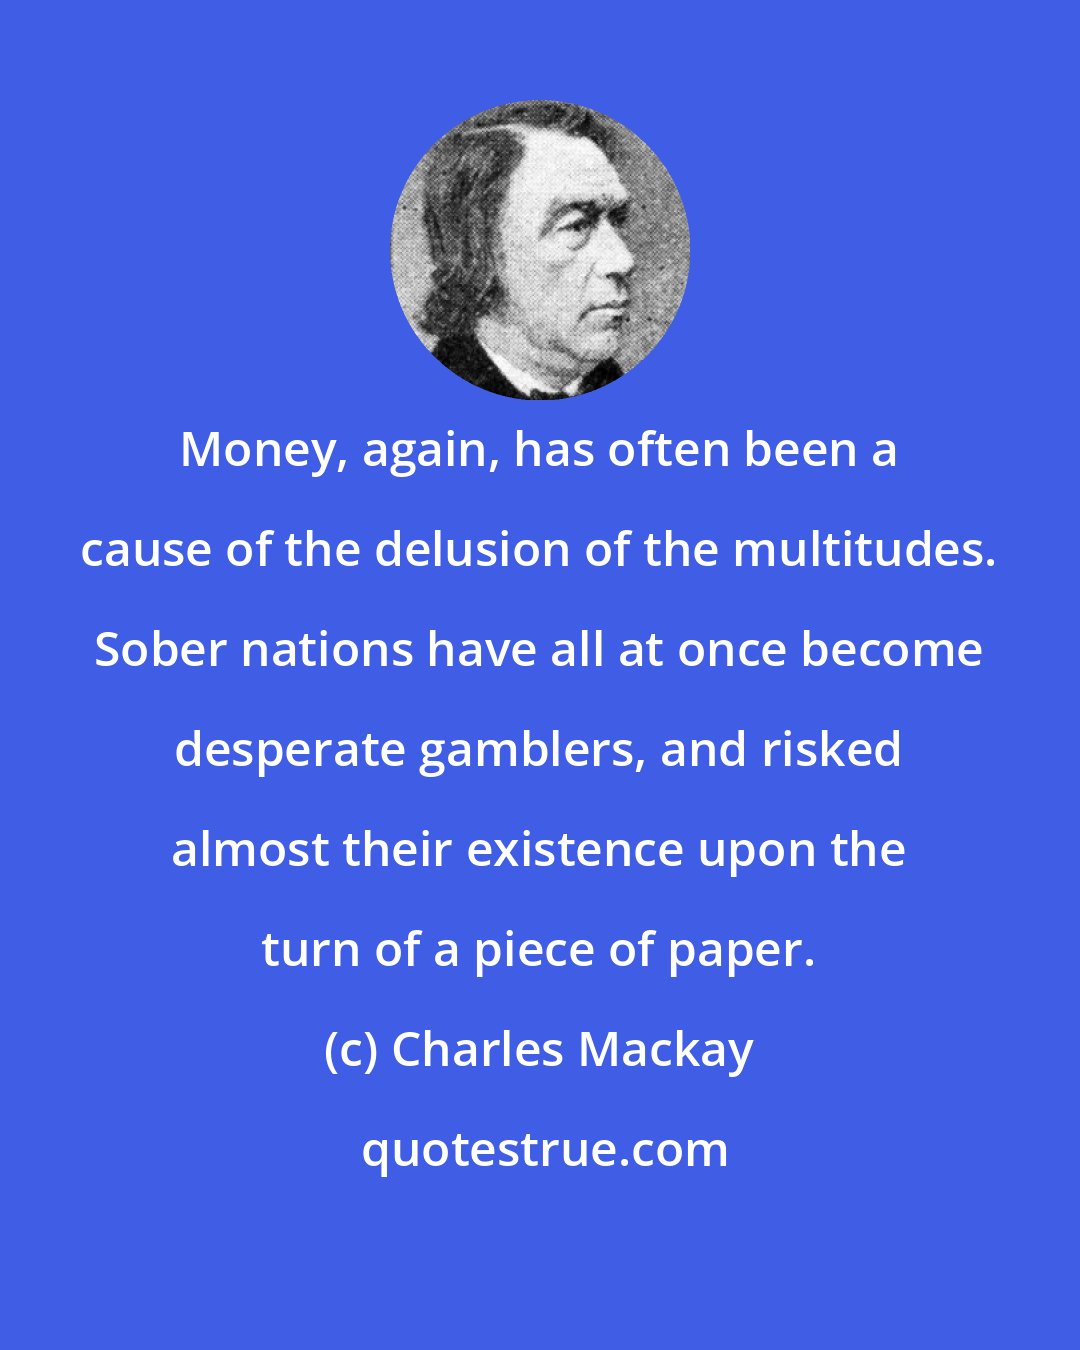 Charles Mackay: Money, again, has often been a cause of the delusion of the multitudes. Sober nations have all at once become desperate gamblers, and risked almost their existence upon the turn of a piece of paper.